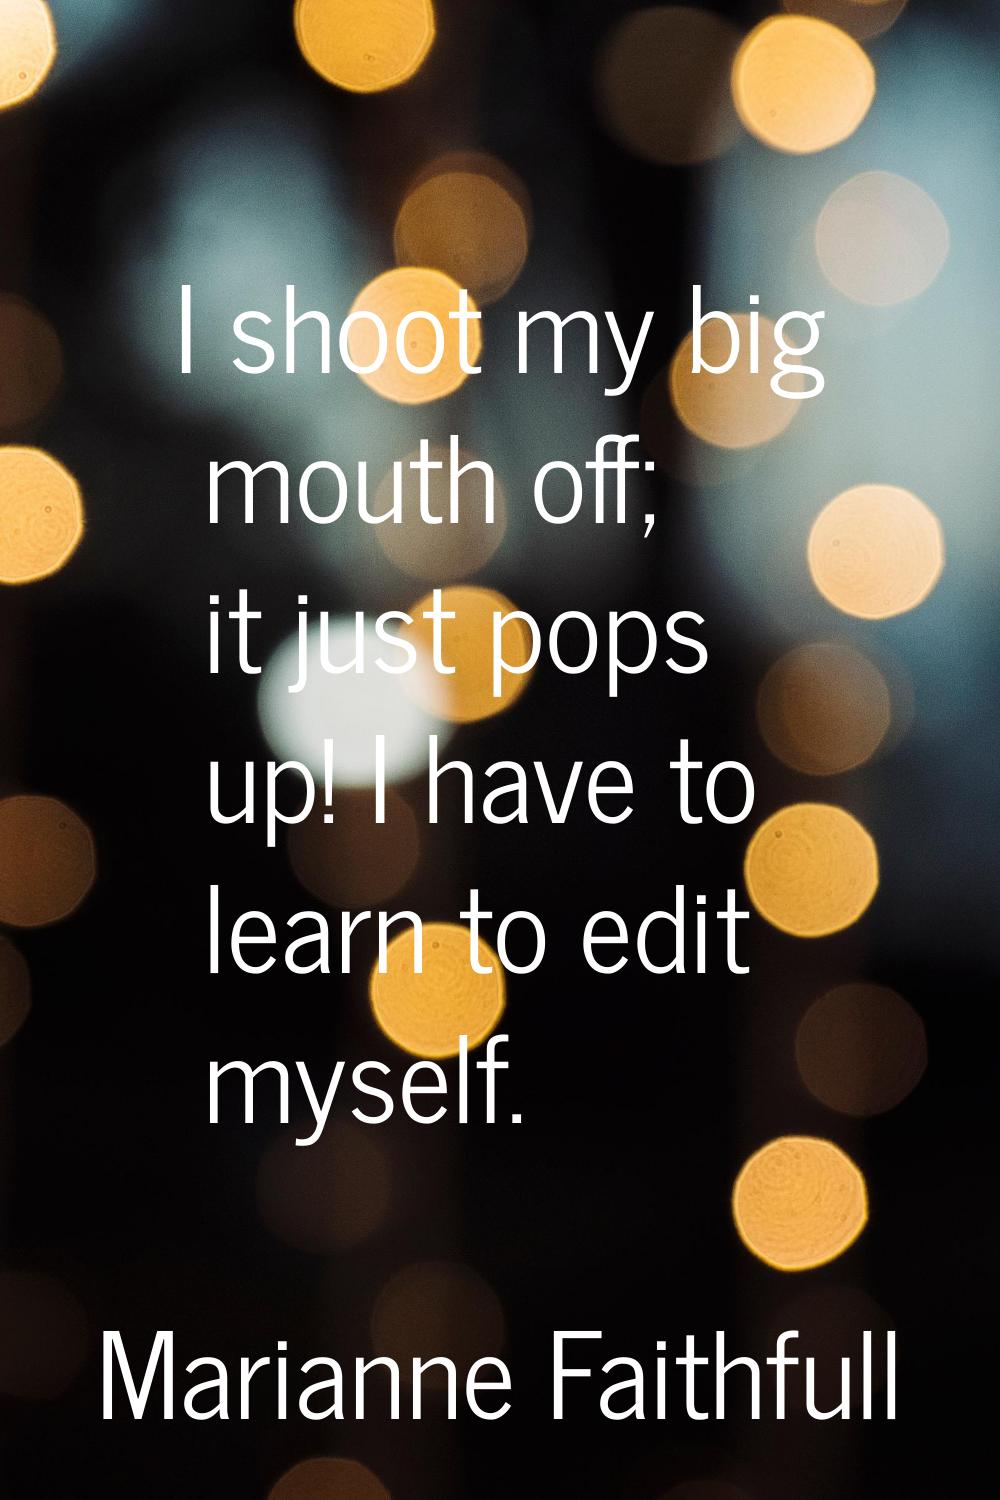 I shoot my big mouth off; it just pops up! I have to learn to edit myself.